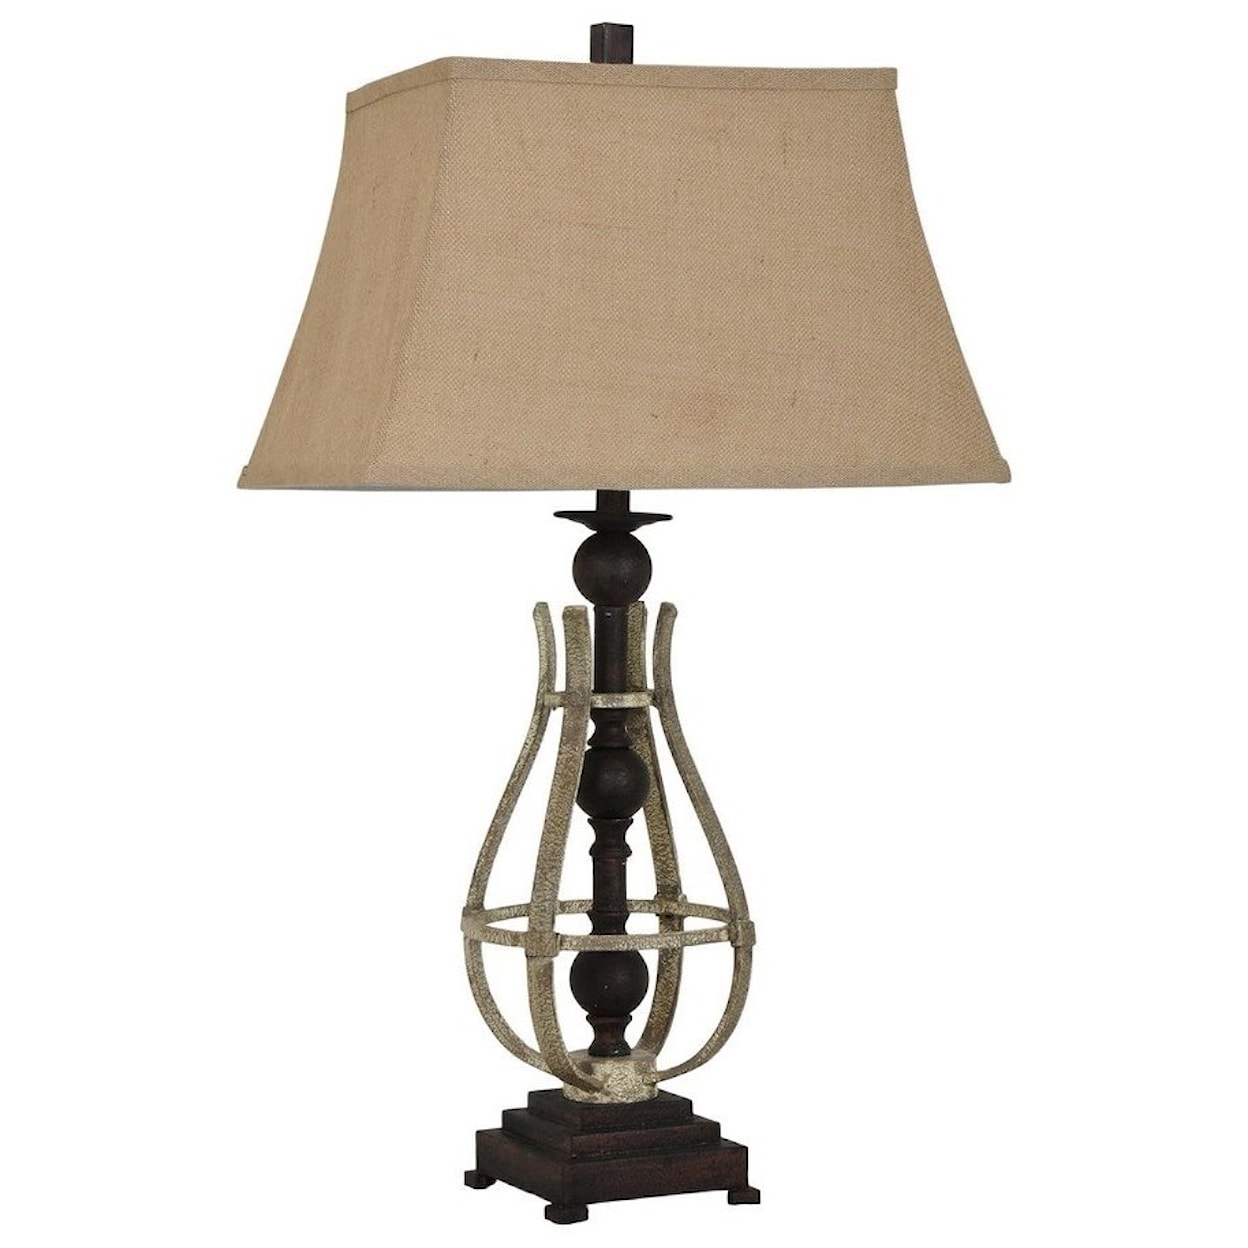 Crestview Collection Lighting Braxton Table Lamp